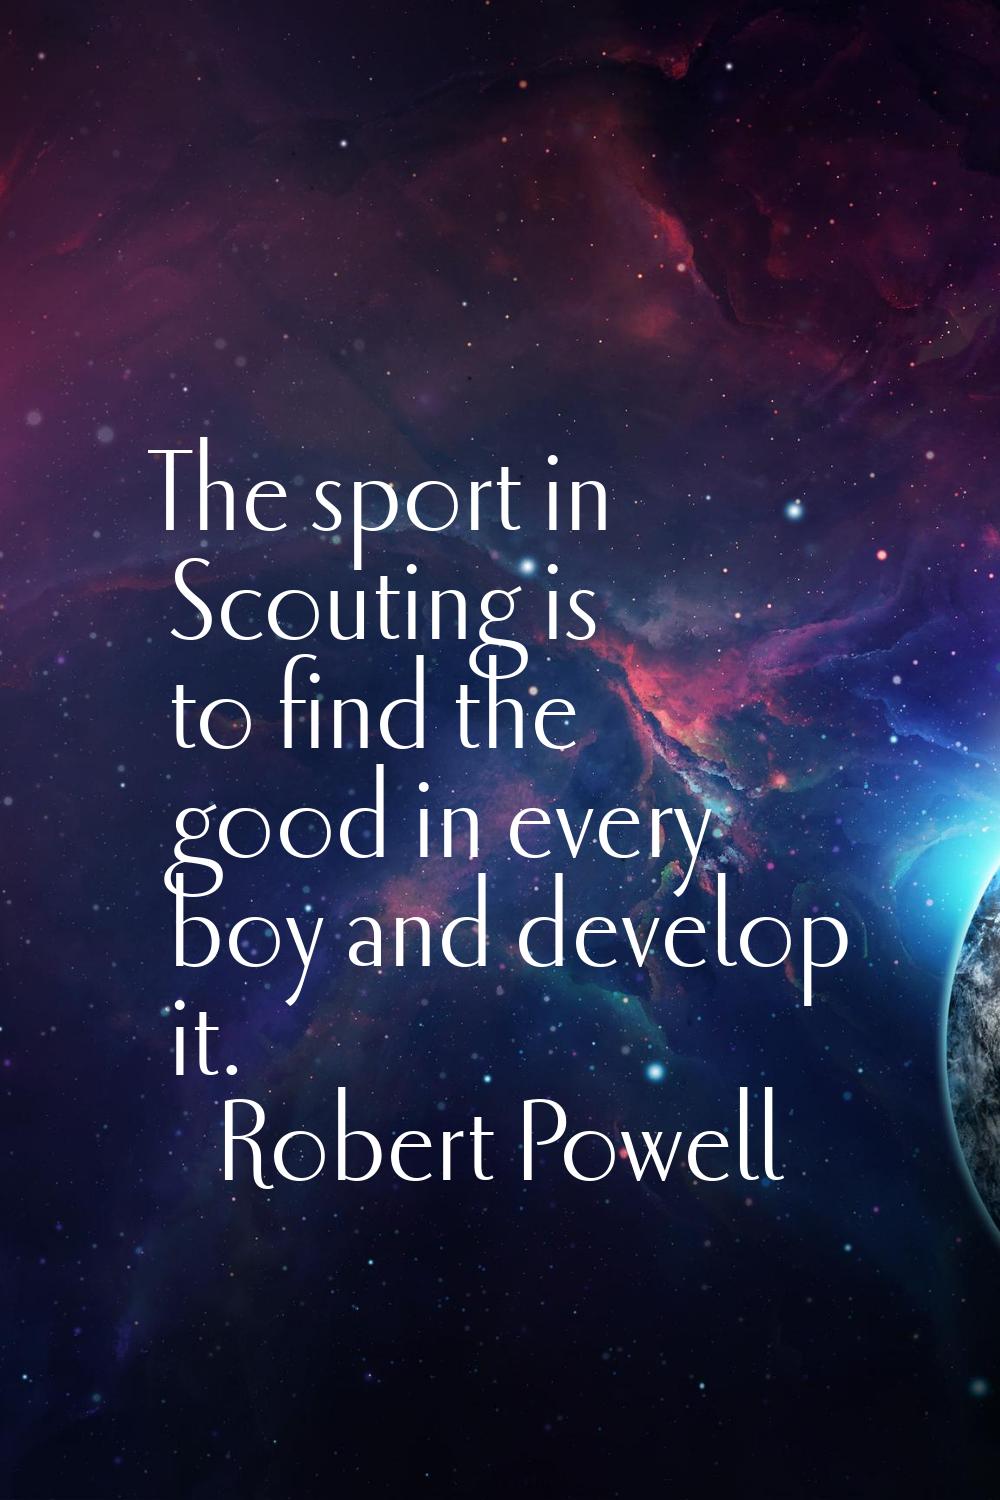 The sport in Scouting is to find the good in every boy and develop it.